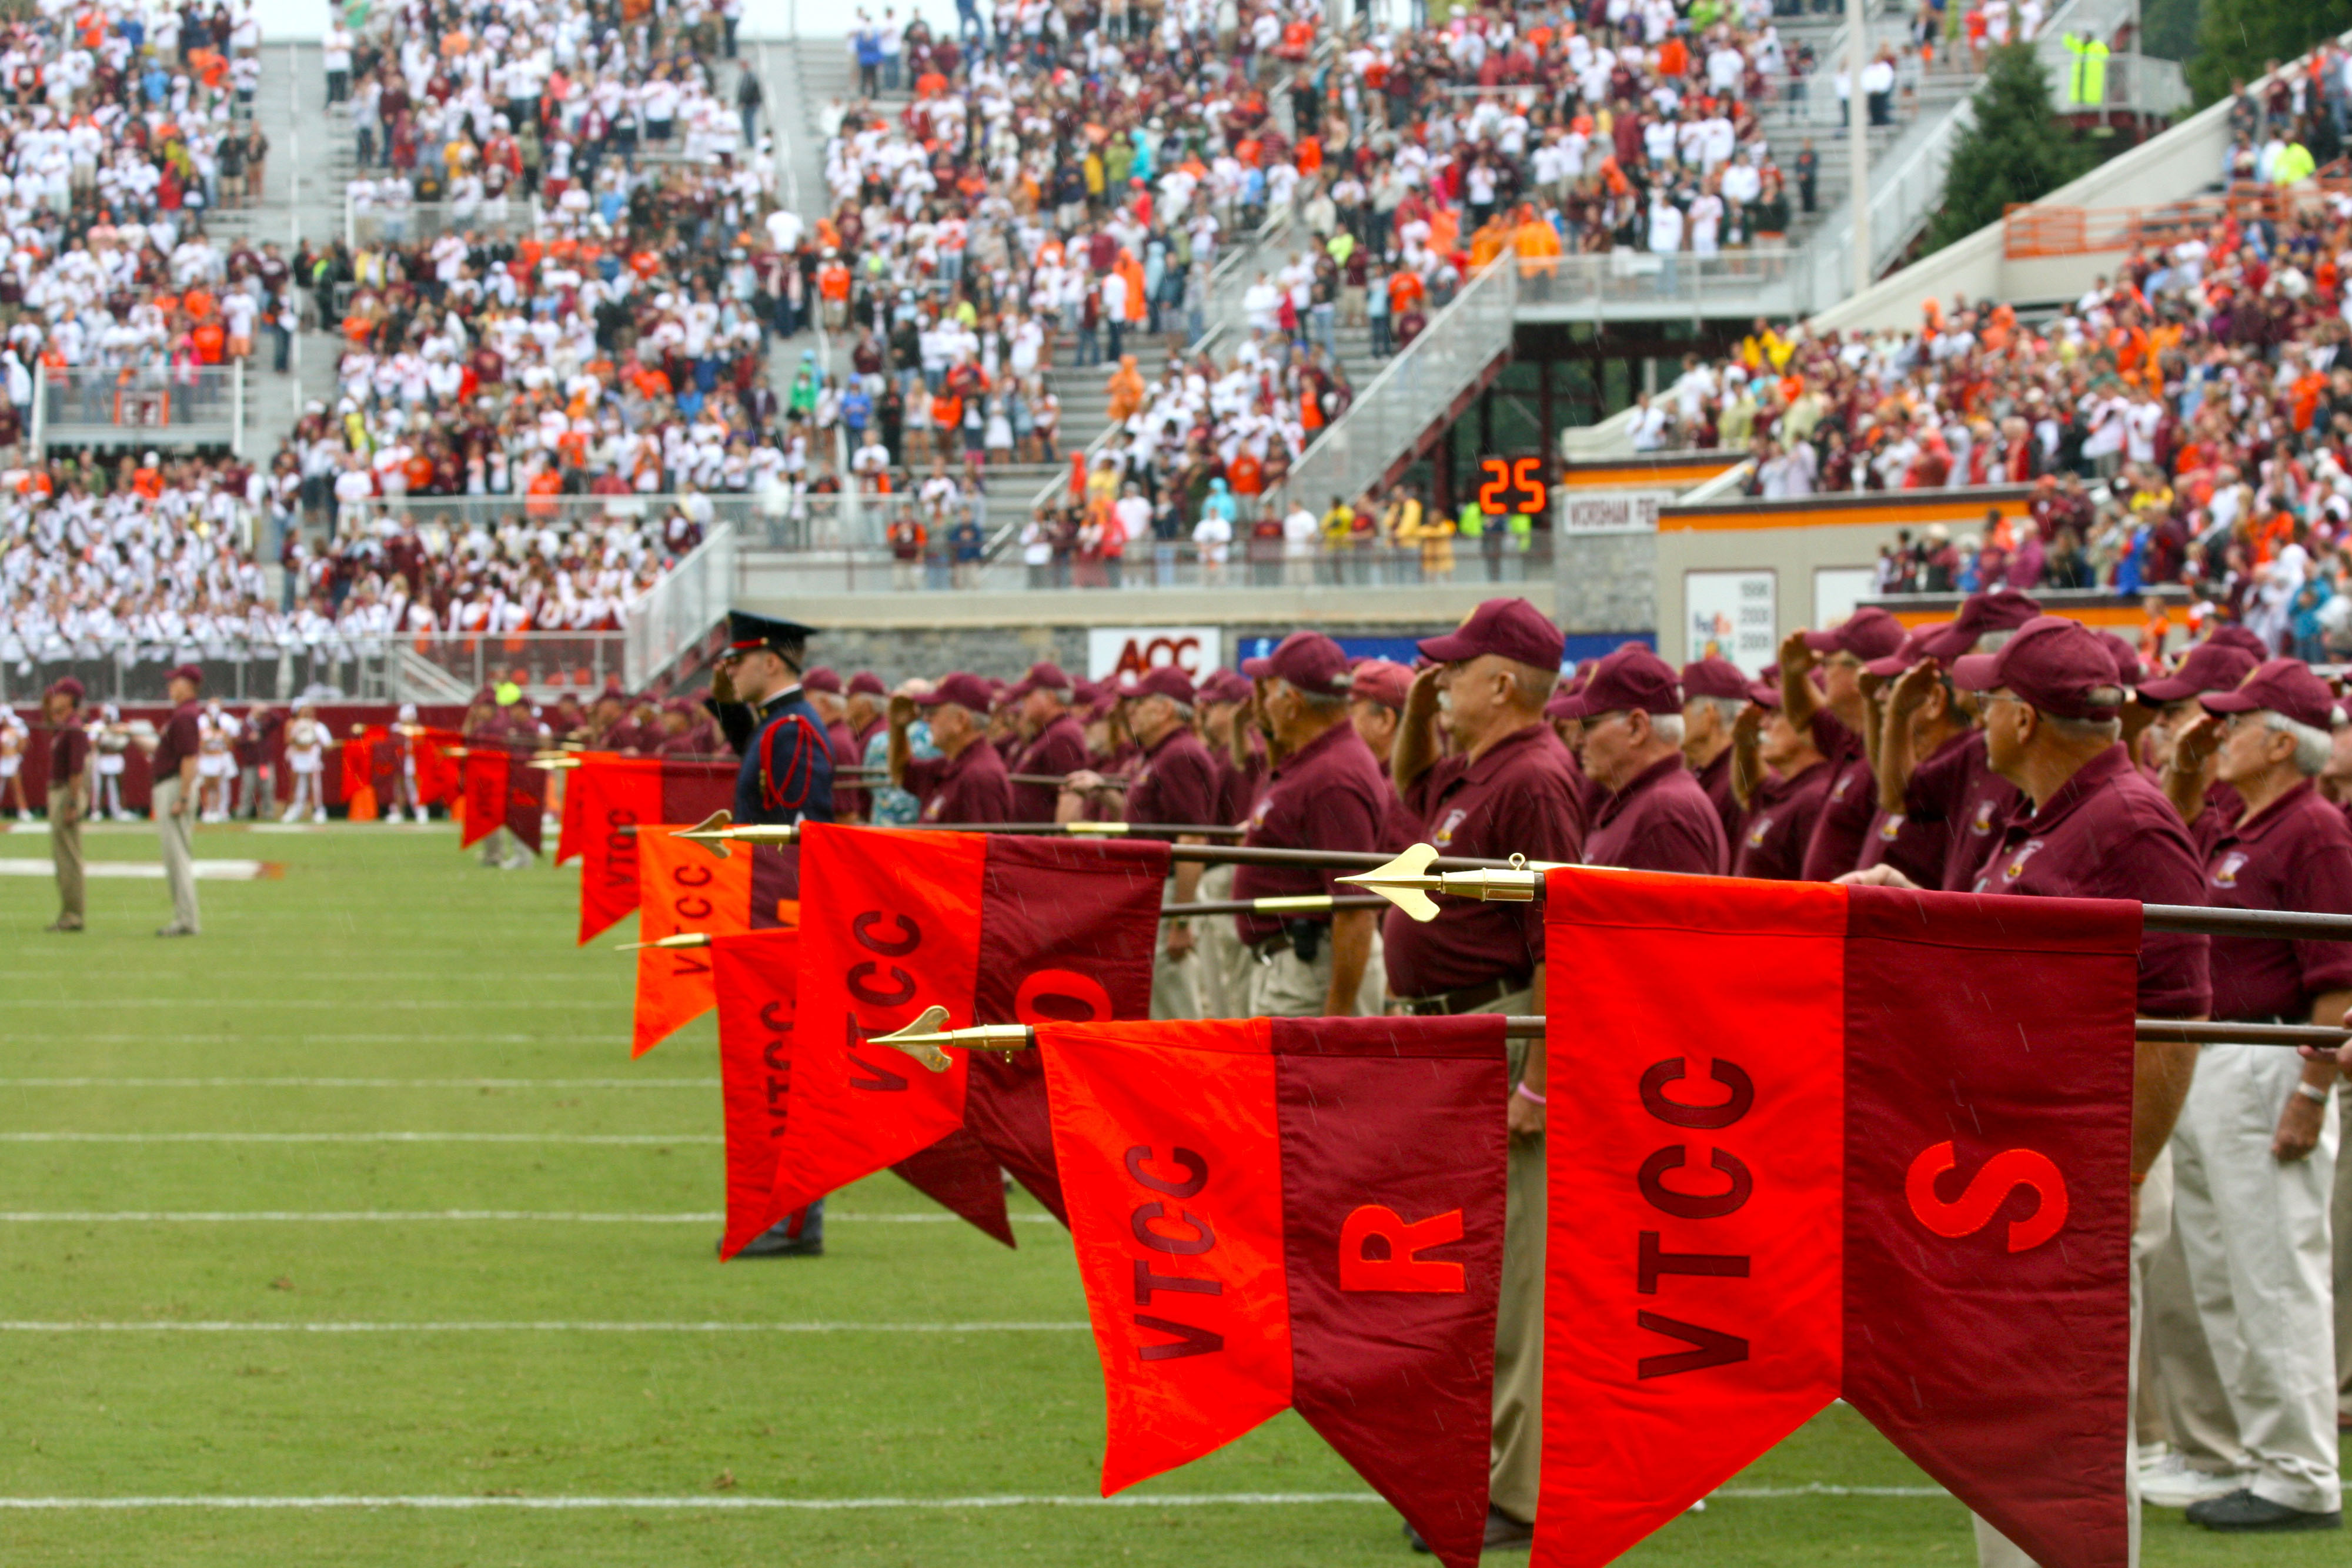 Alumni of the Virginia Tech Corps of Cadets join the Regiment on the field prior to the Corps Homecoming game in 2010